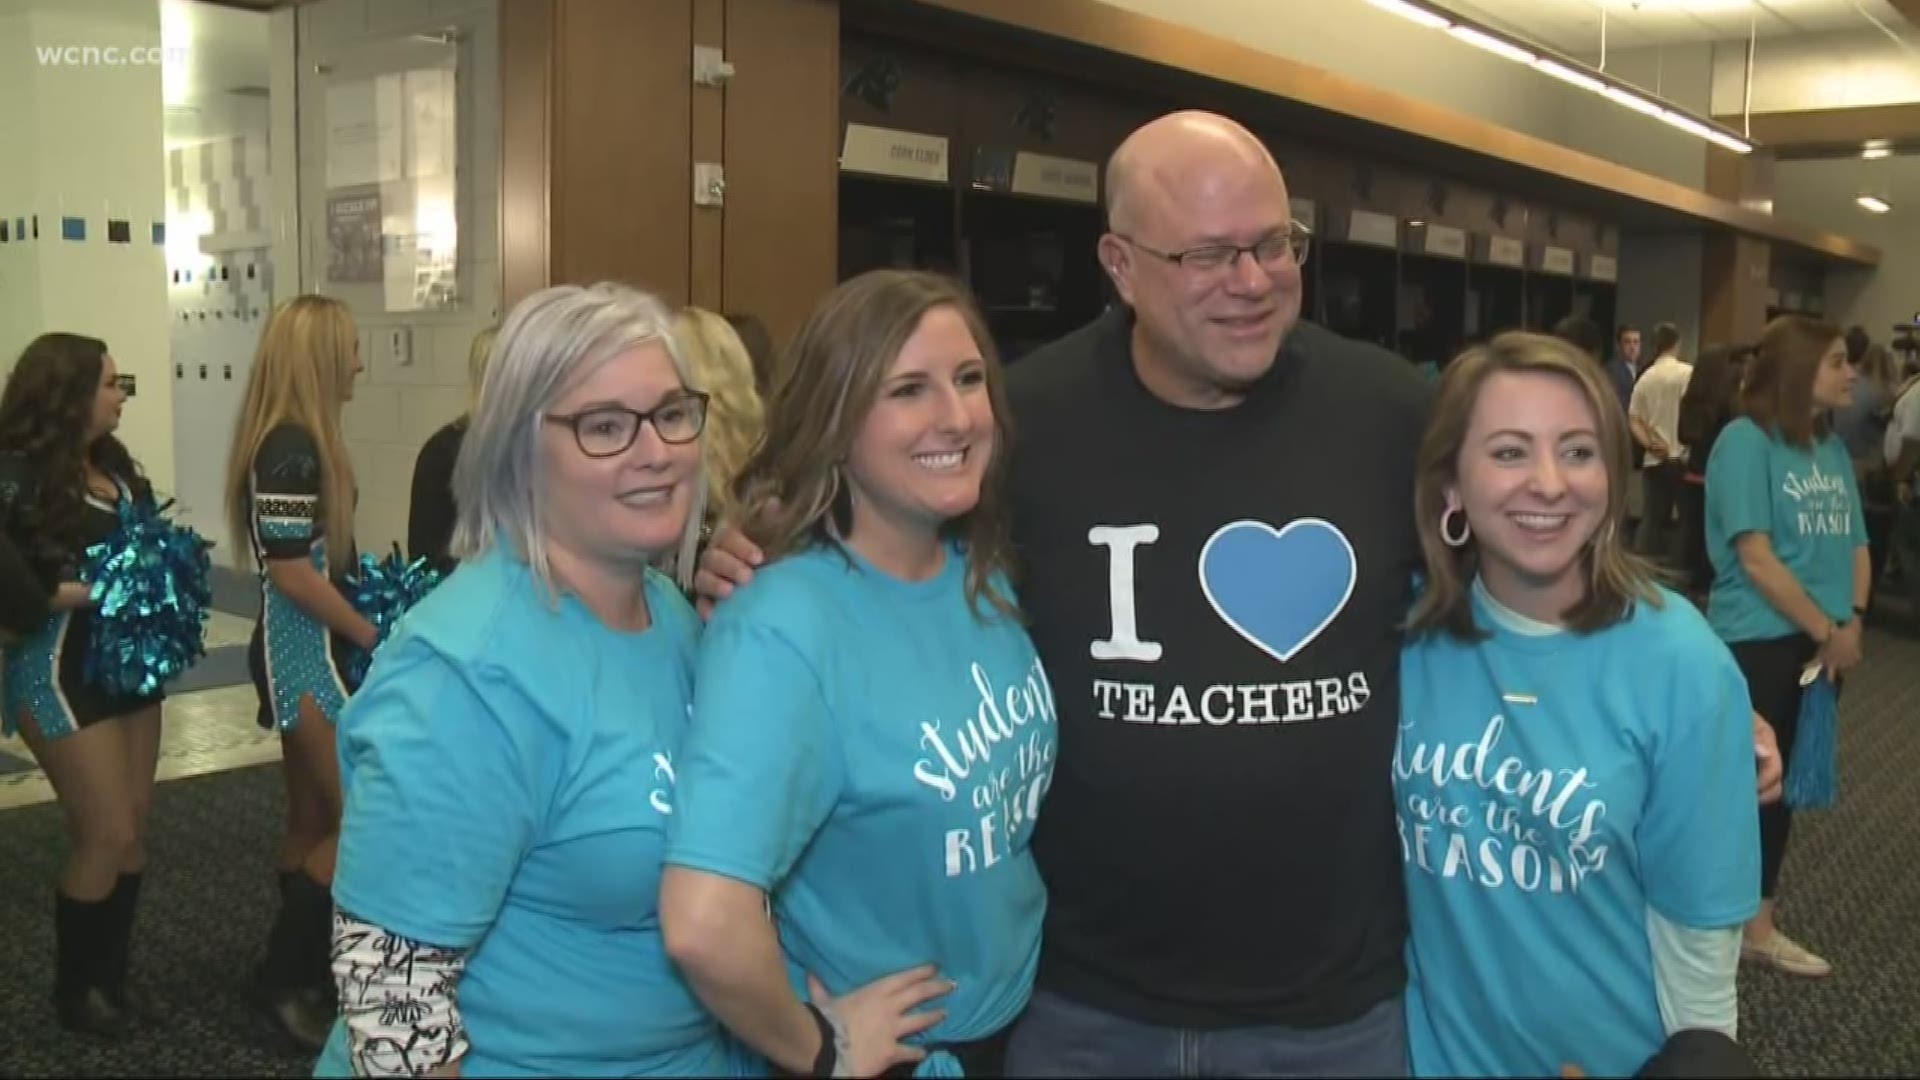 One of Tepper's goals has been helping local teachers. He holds several events each year to give to schools.